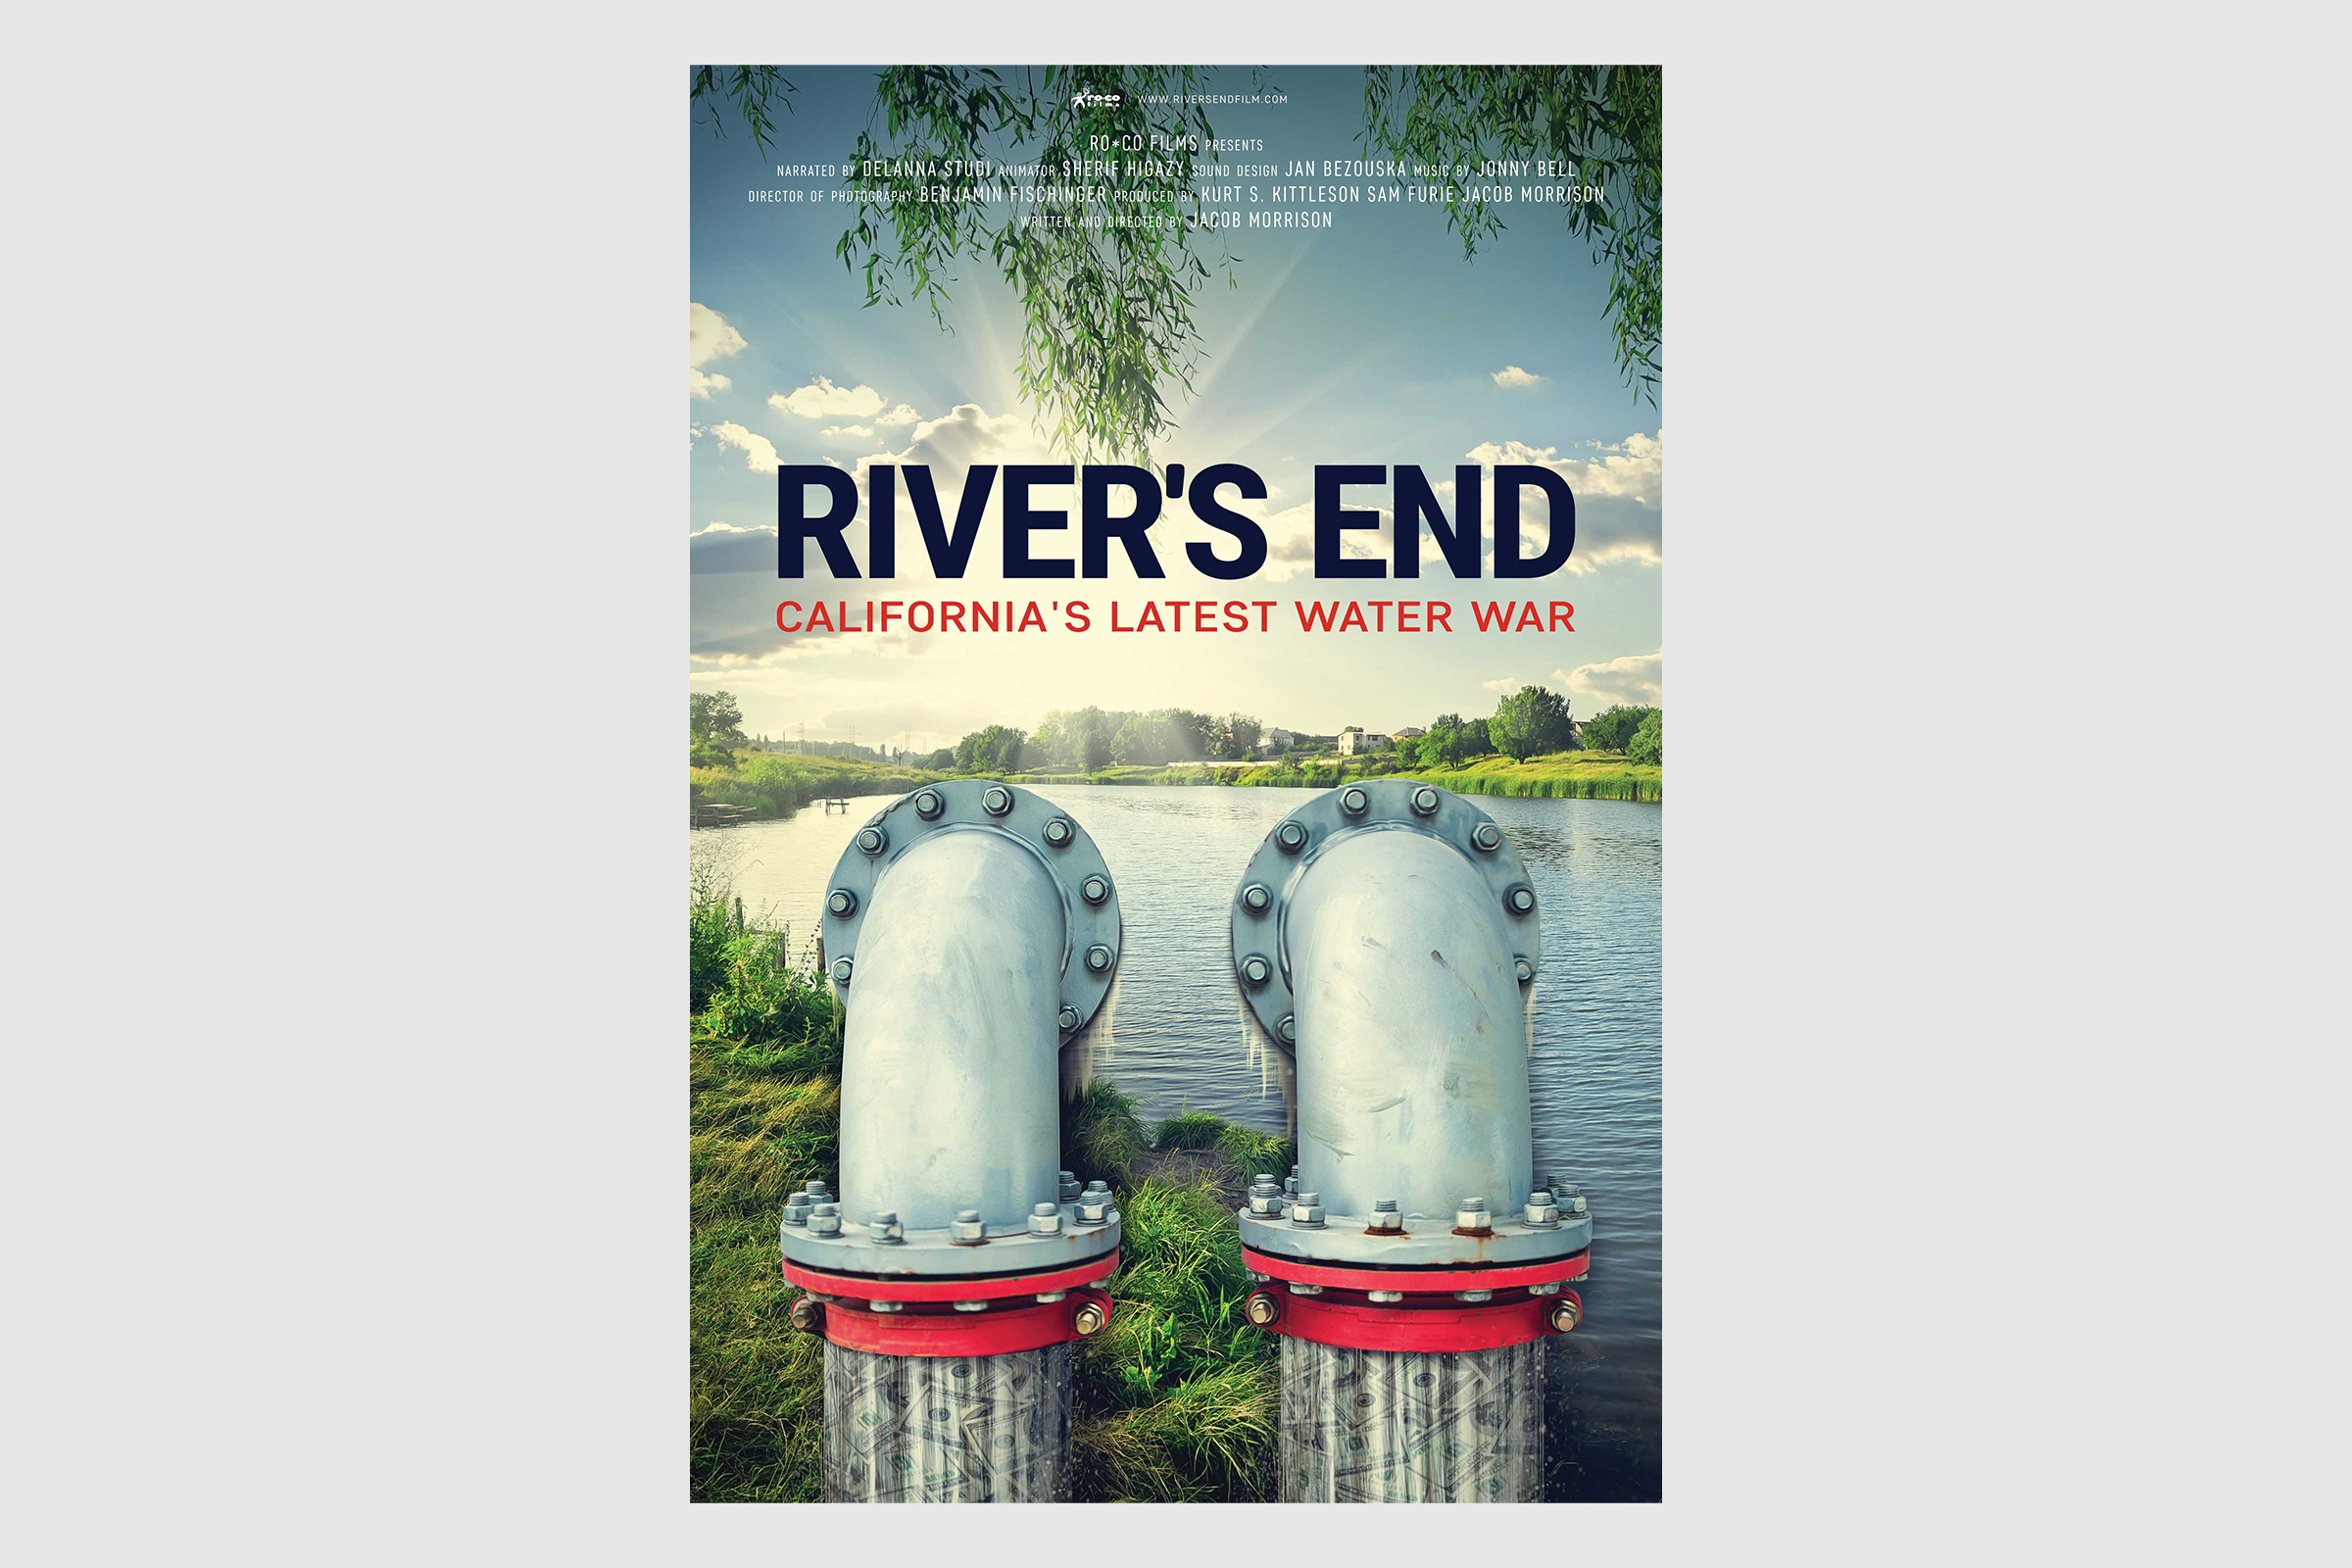 The film poster for River's End.